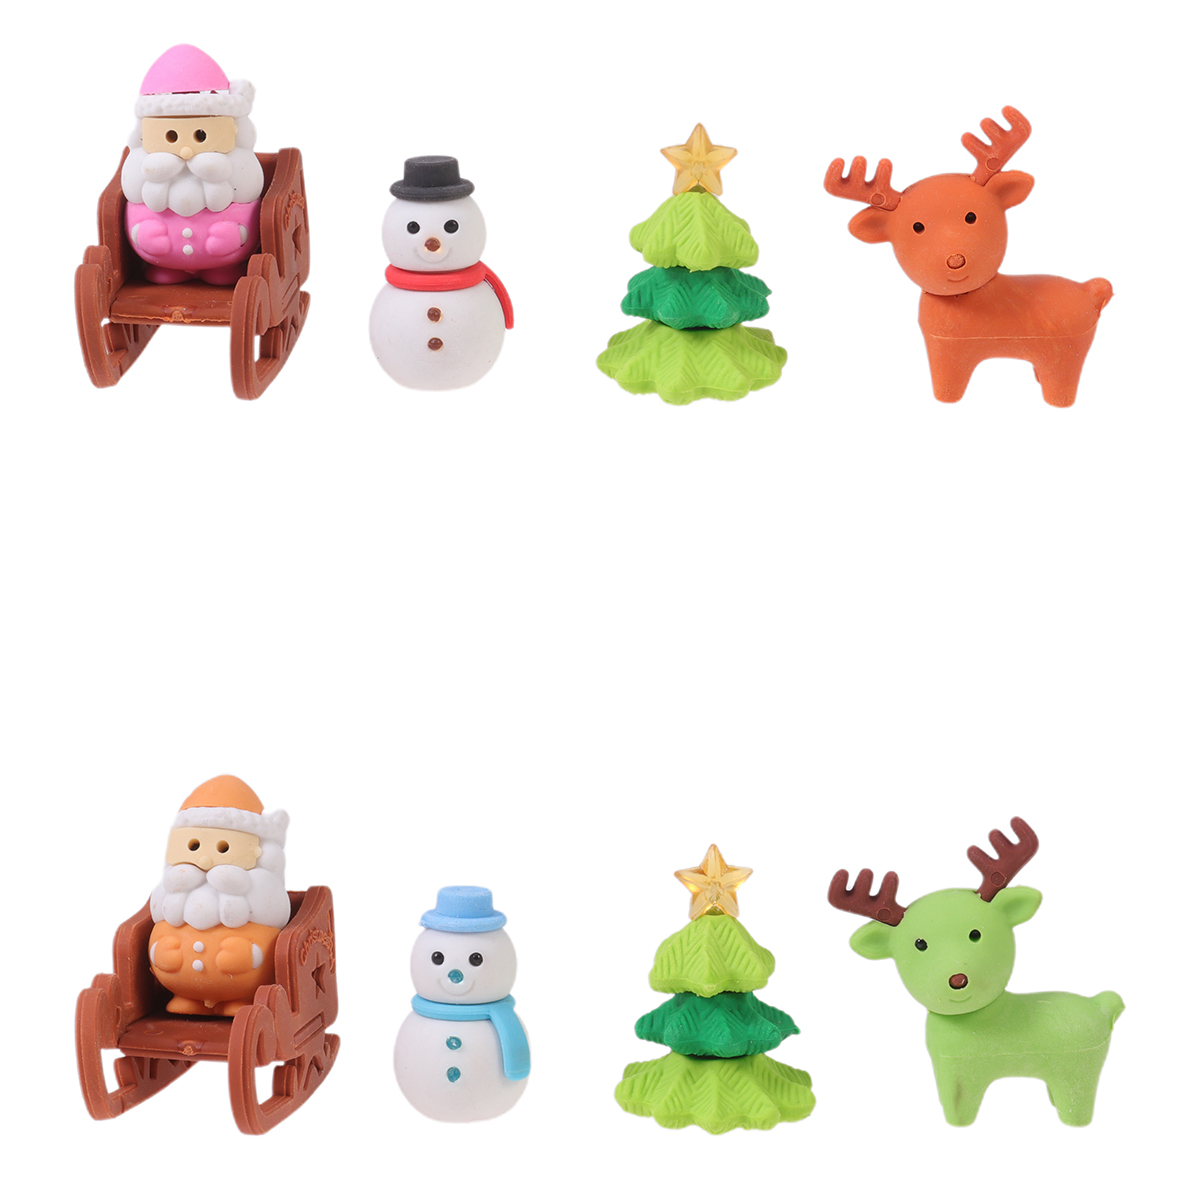 3pcs Adorable Erasers Christmas Snowman Favors Gifts School Supplies Stationery for Students Children, Size: 17.5x9cm